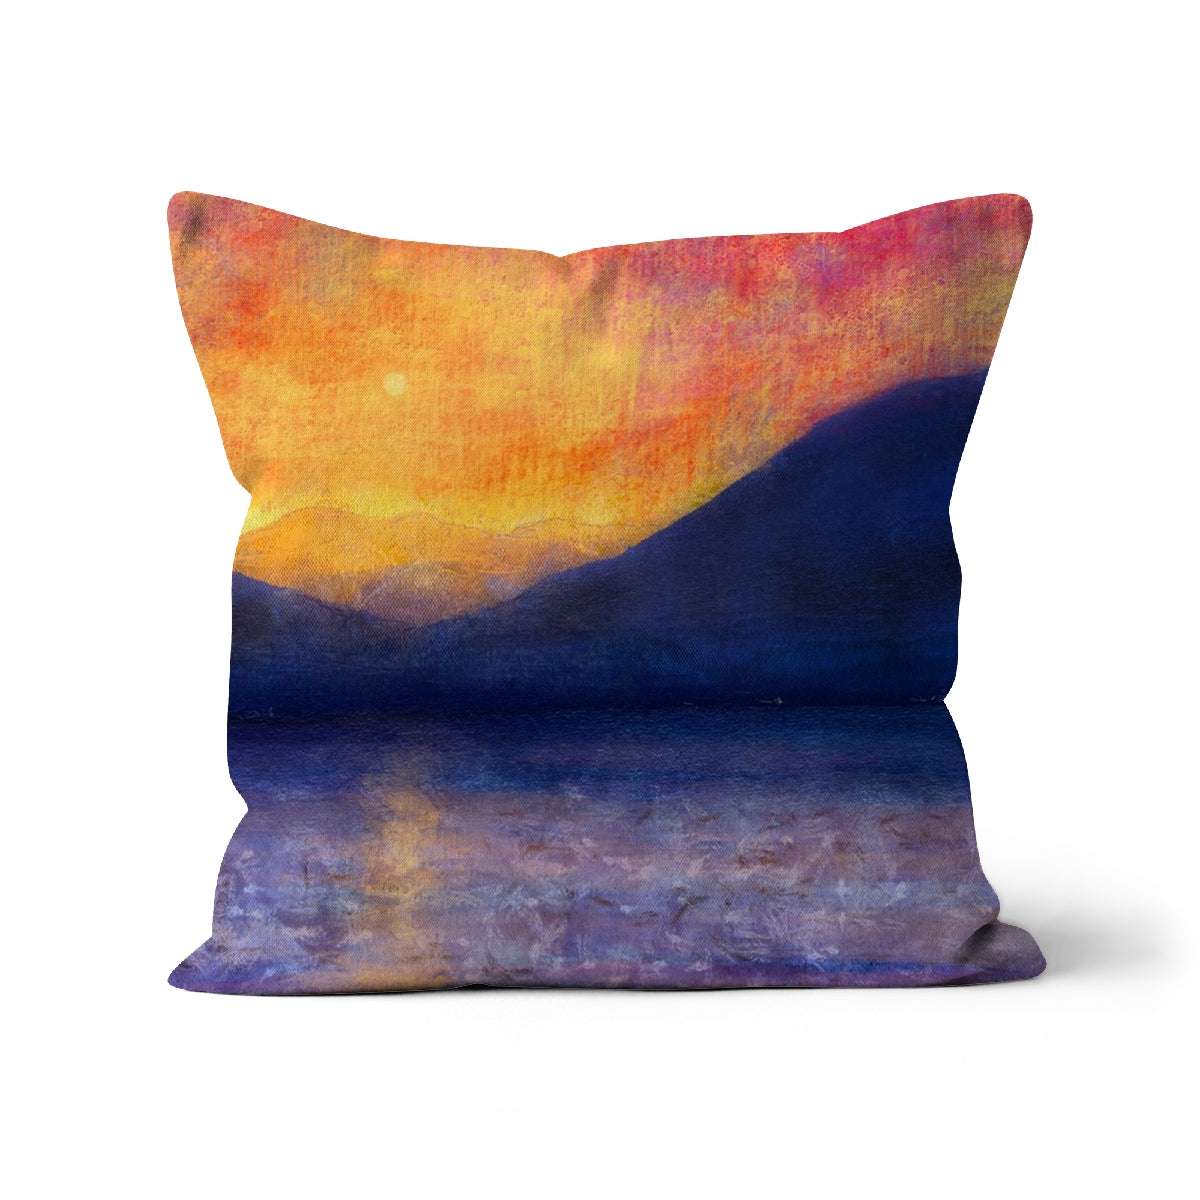 Sunset Approaching Mull Art Gifts Cushion-Cushions-Hebridean Islands Art Gallery-Faux Suede-22"x22"-Paintings, Prints, Homeware, Art Gifts From Scotland By Scottish Artist Kevin Hunter